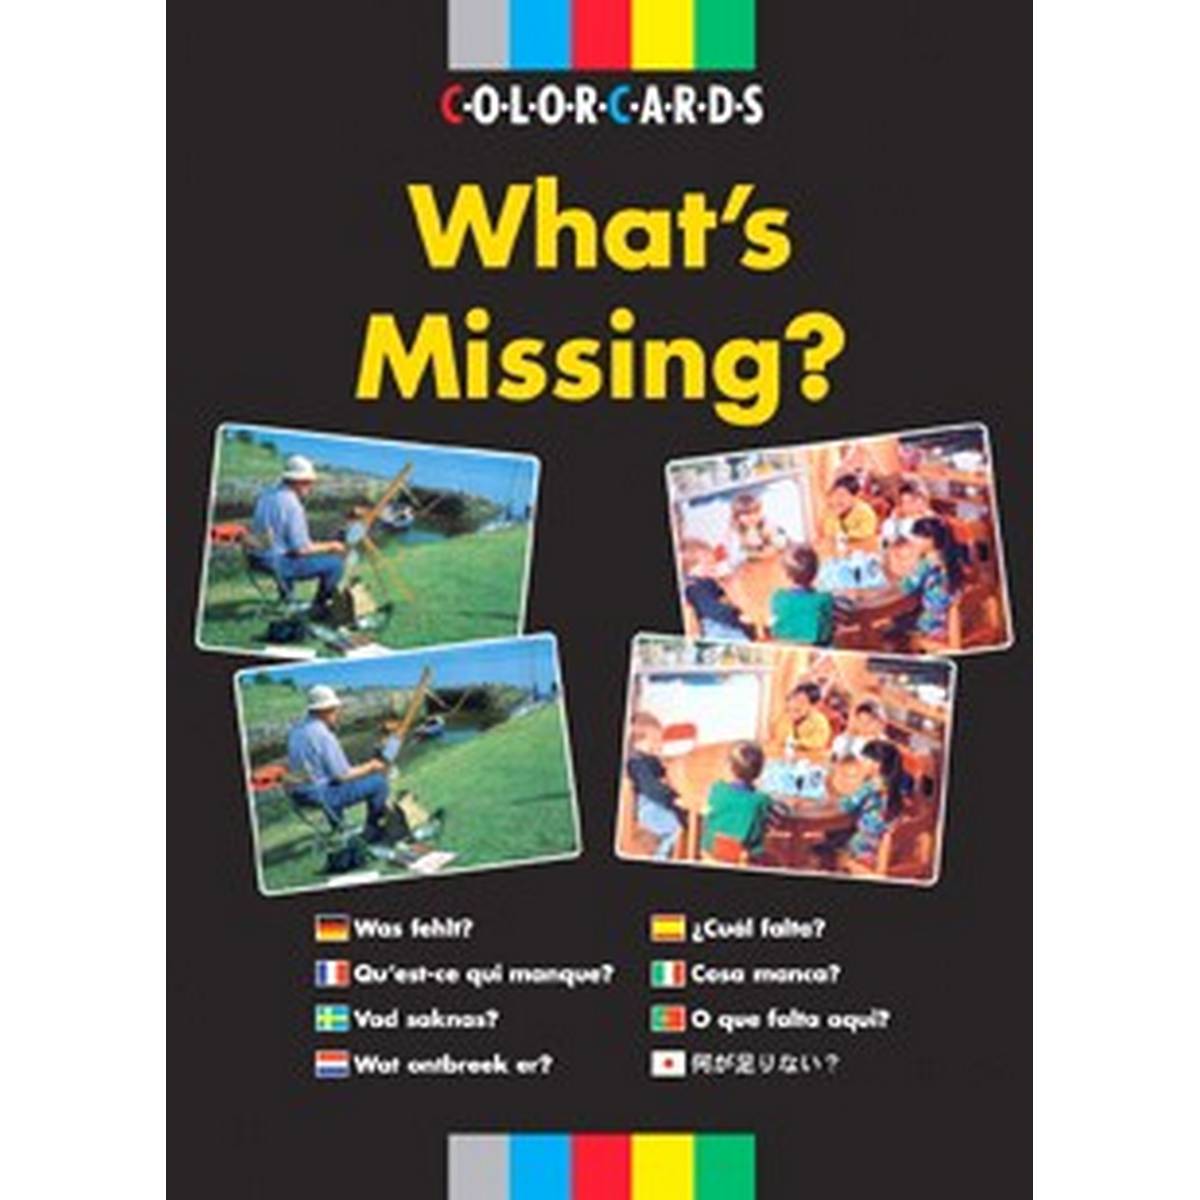 ColorCards: What's Missing?